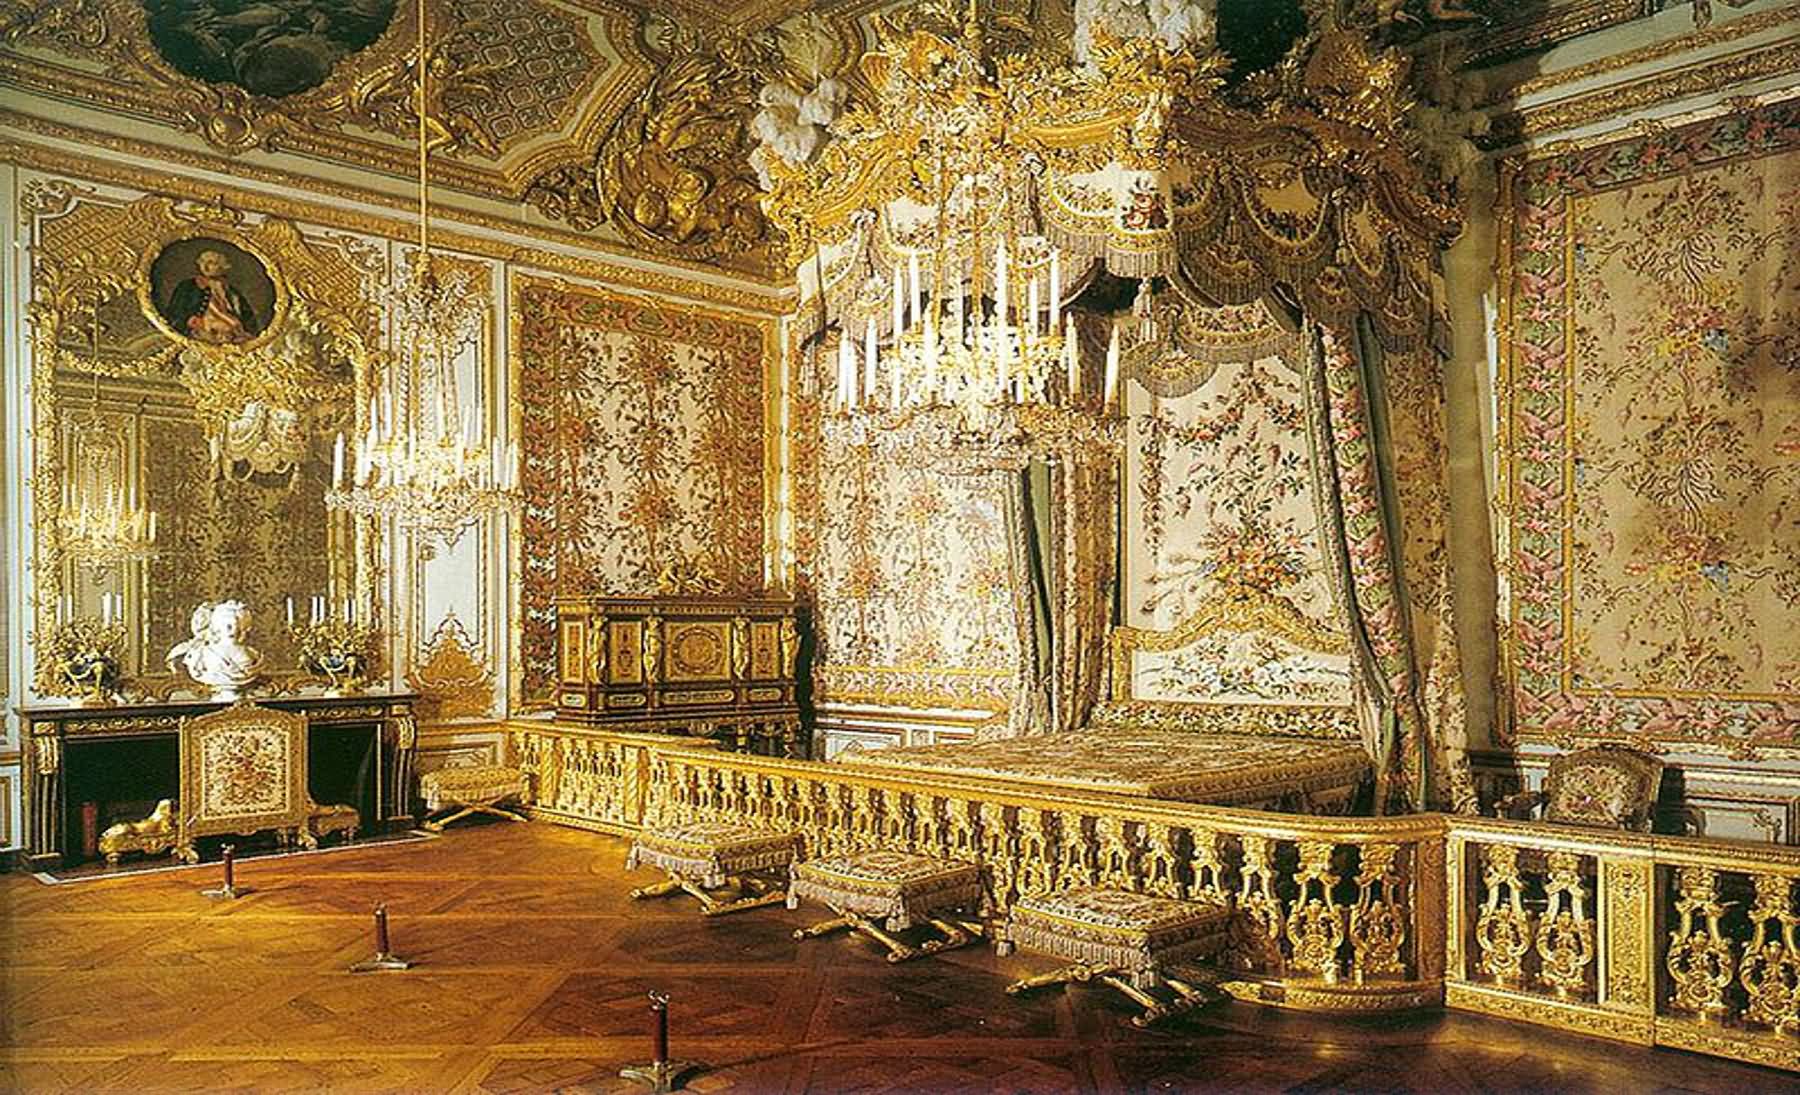 Inside View Of The Palace of Versailles In France